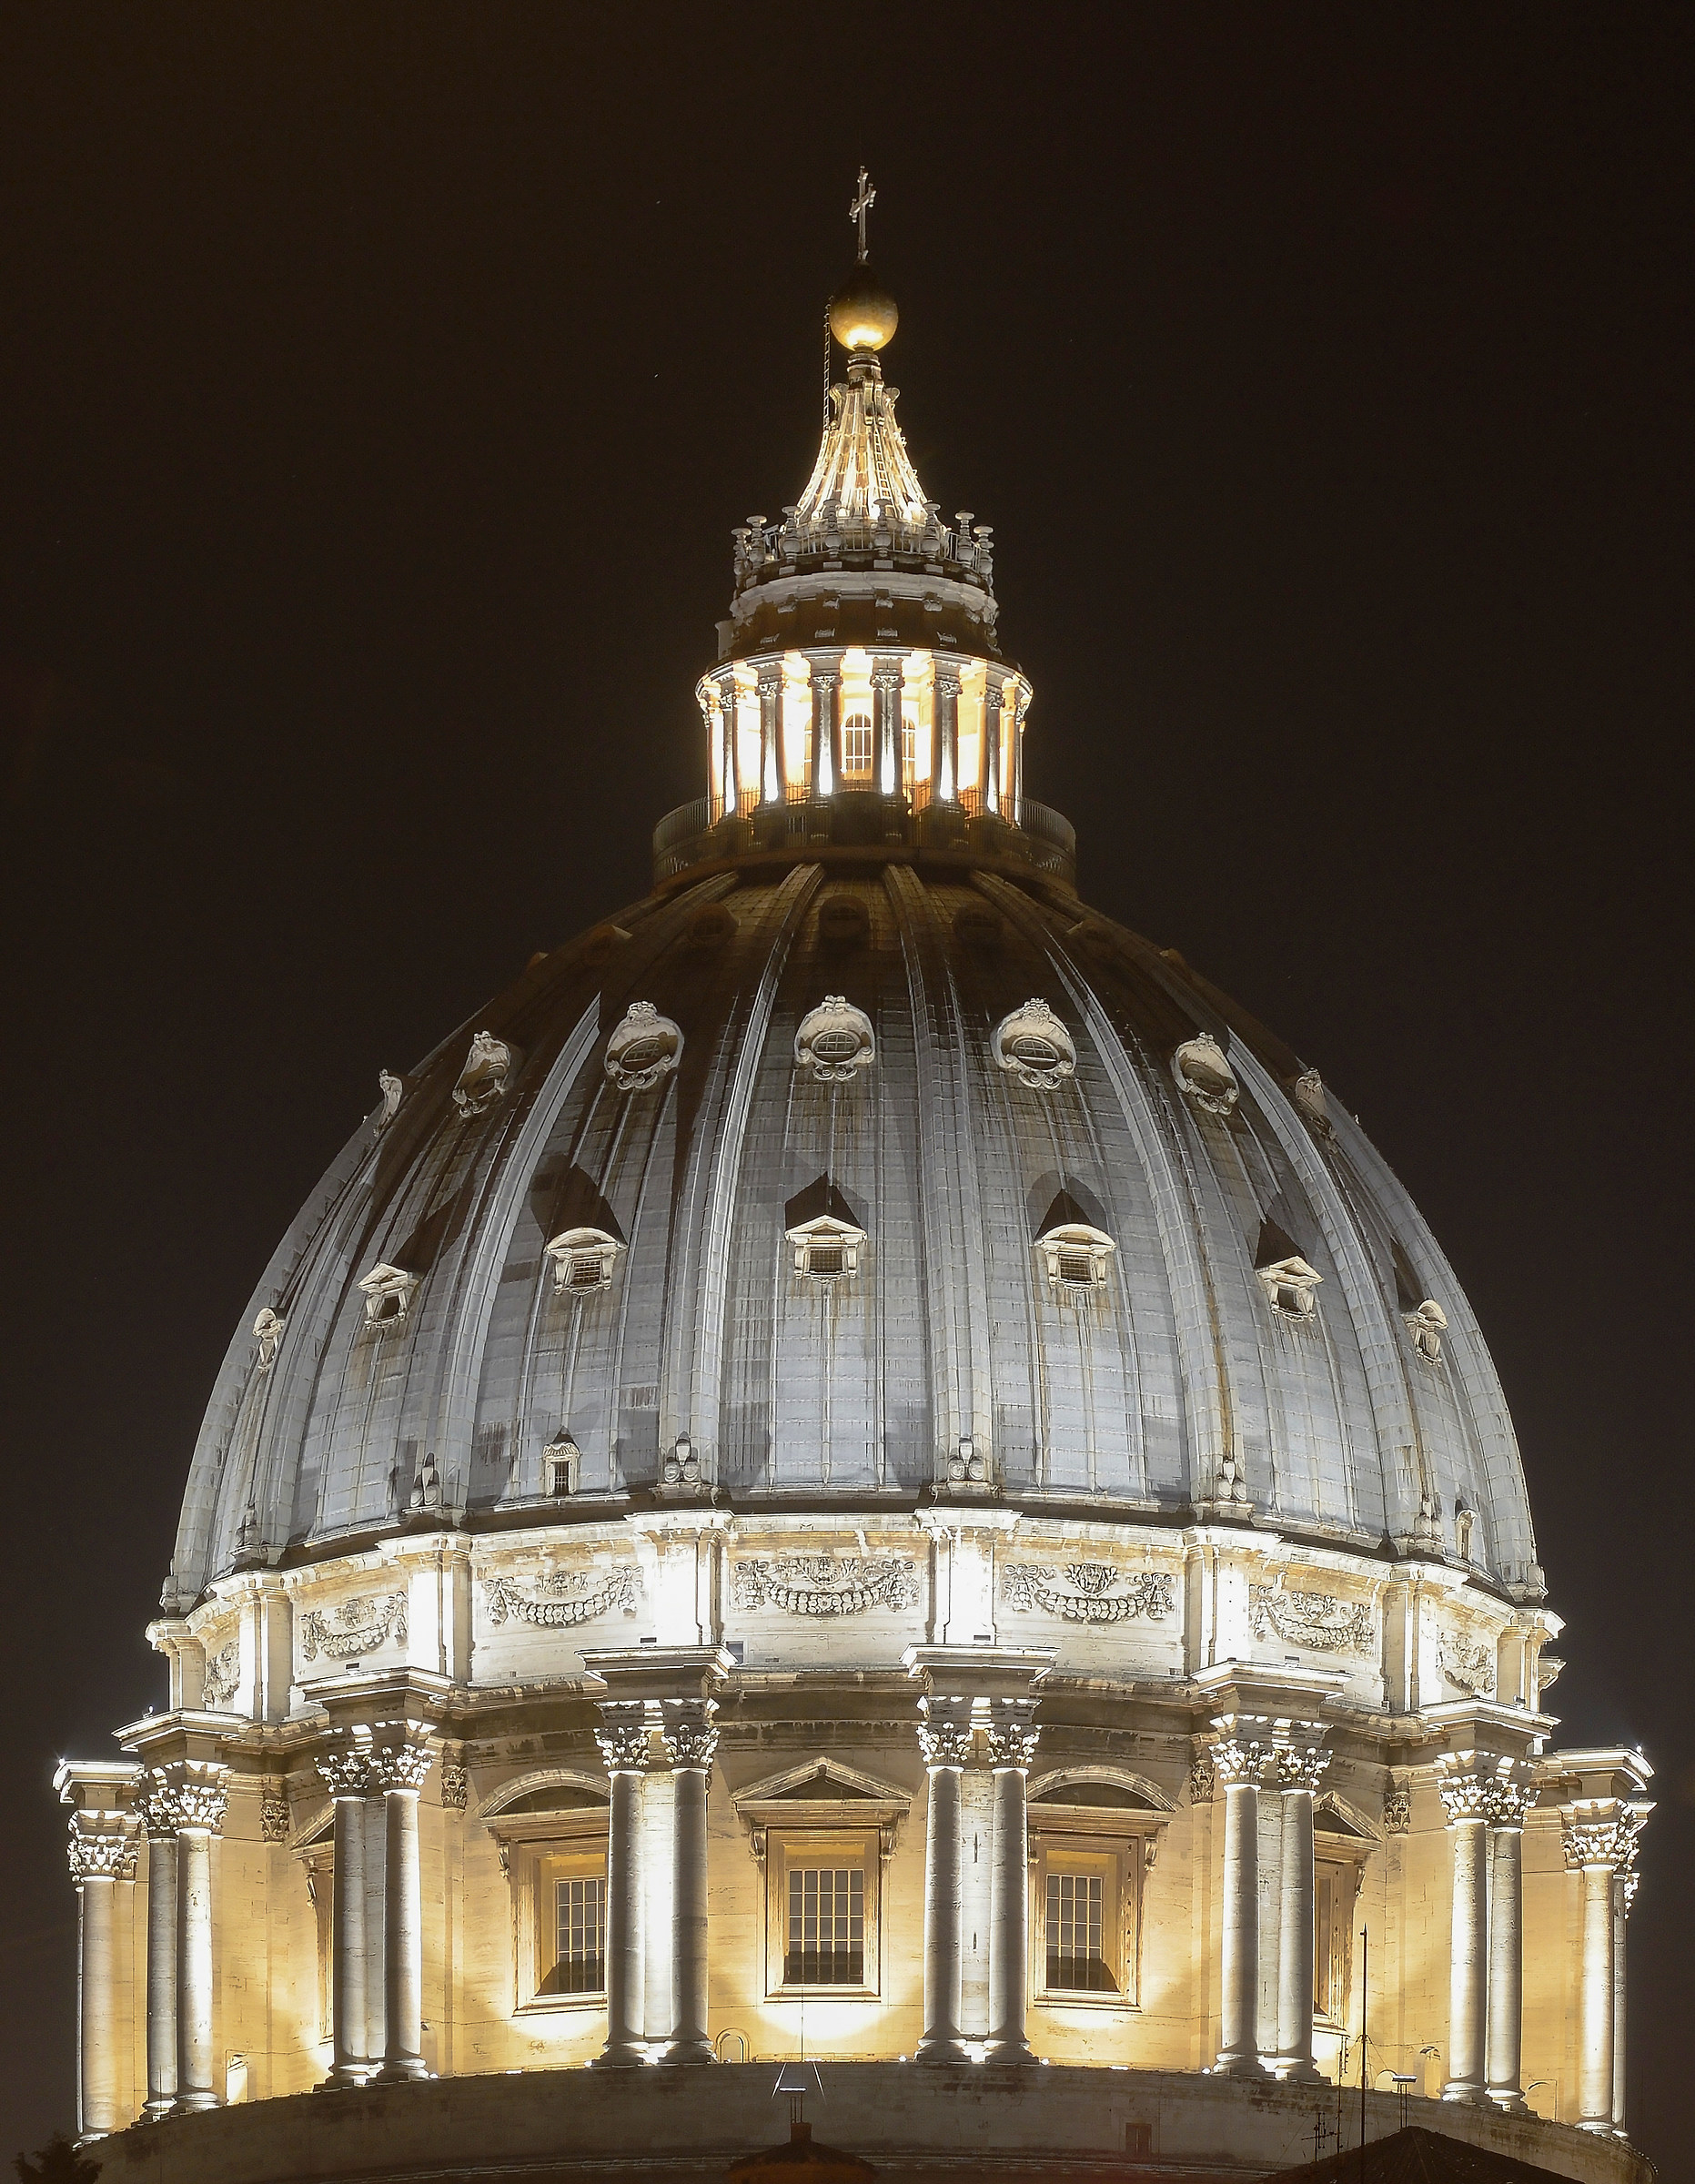 The dome of St. Peter's Night...